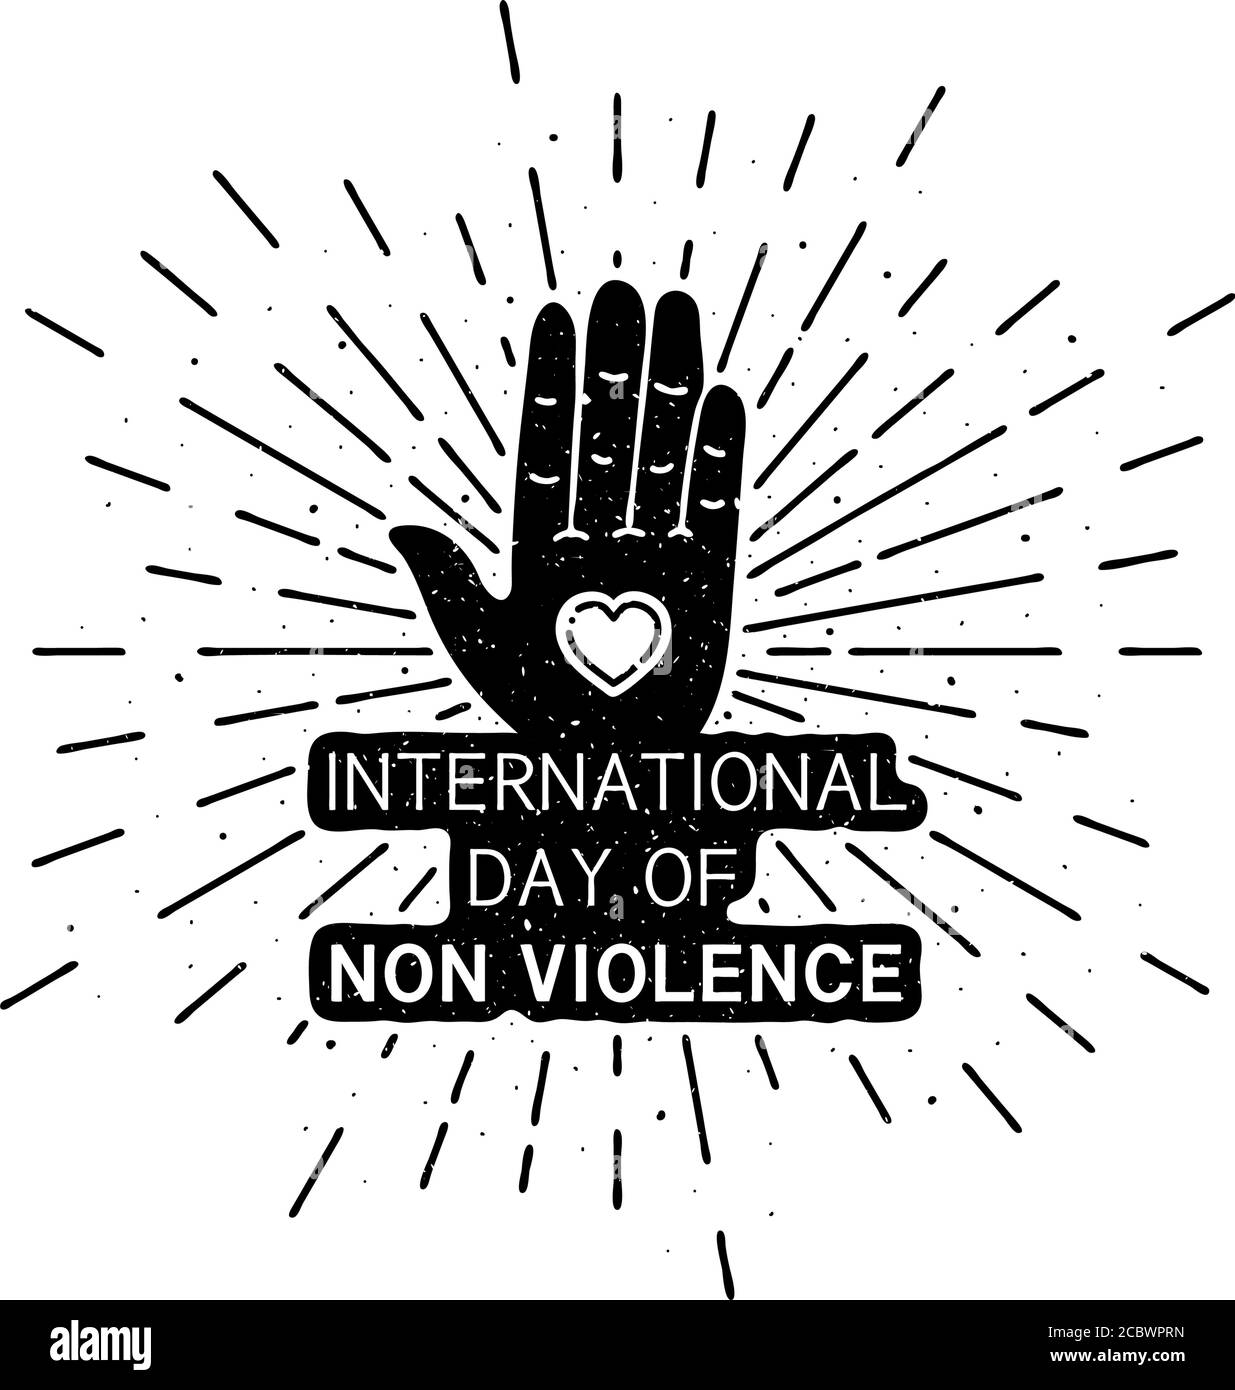 International day of non violence with lettering. Holiday grunge vintage illustration with sun rays in the background Stock Vector